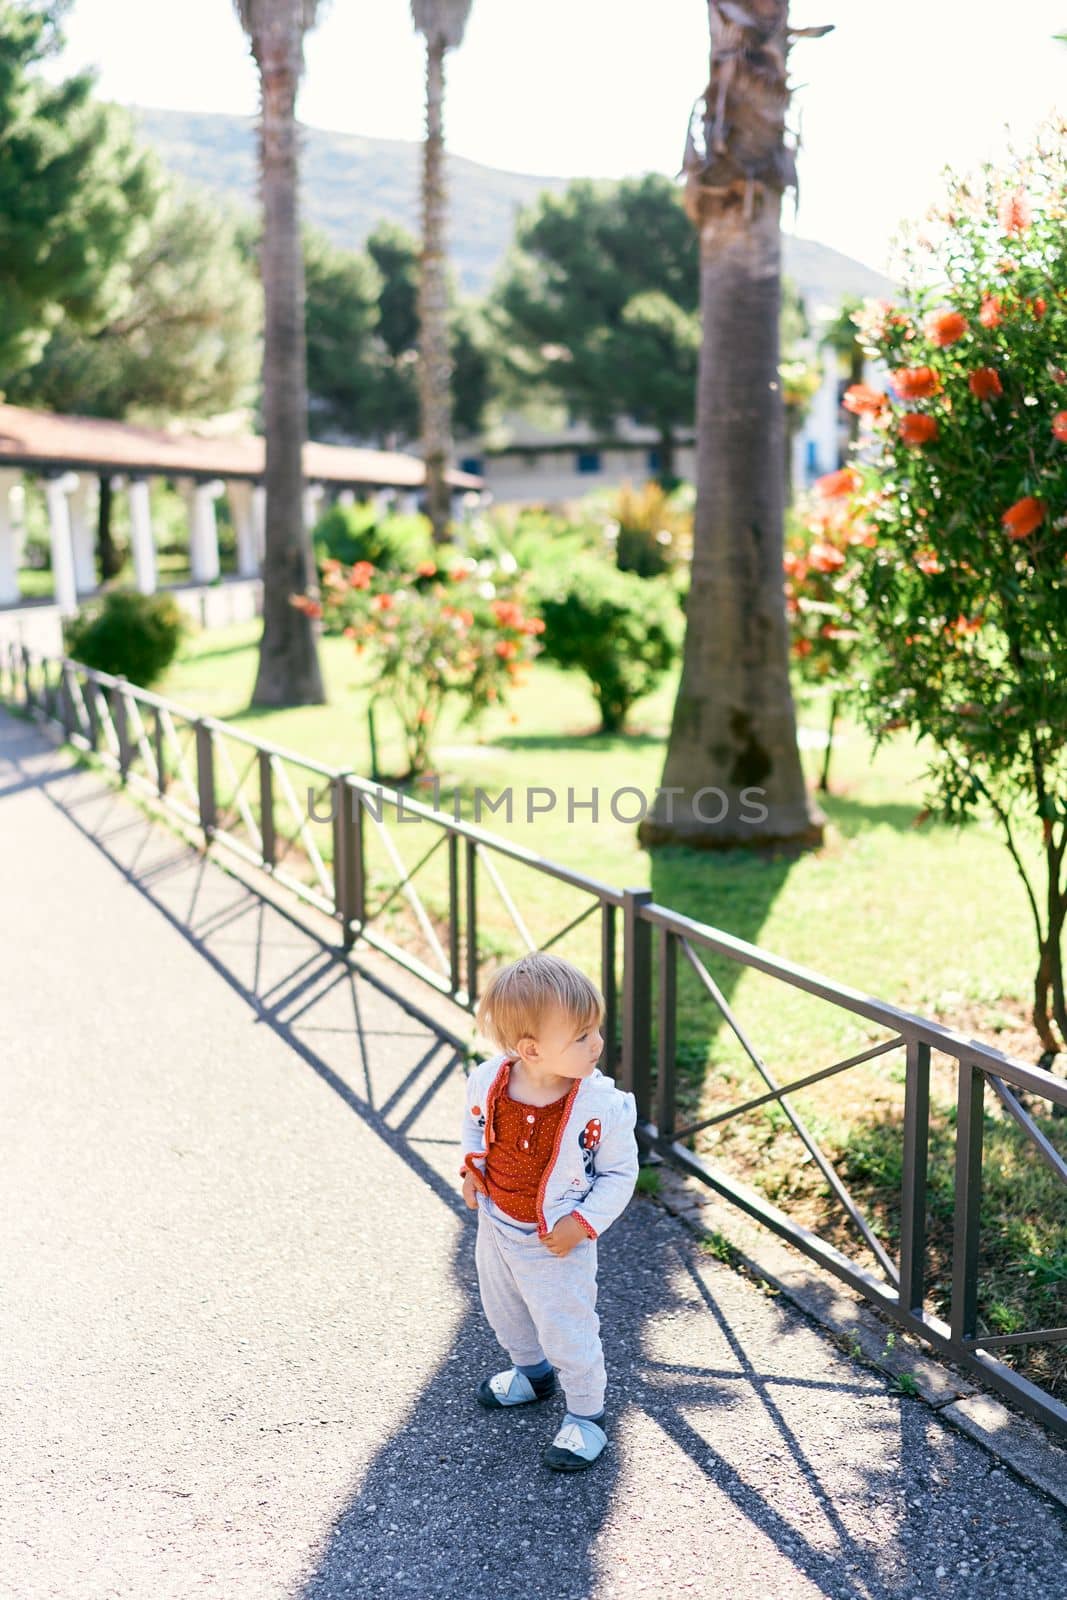 Kid stands on the path in the garden near the metal fence, turning his head. High quality photo